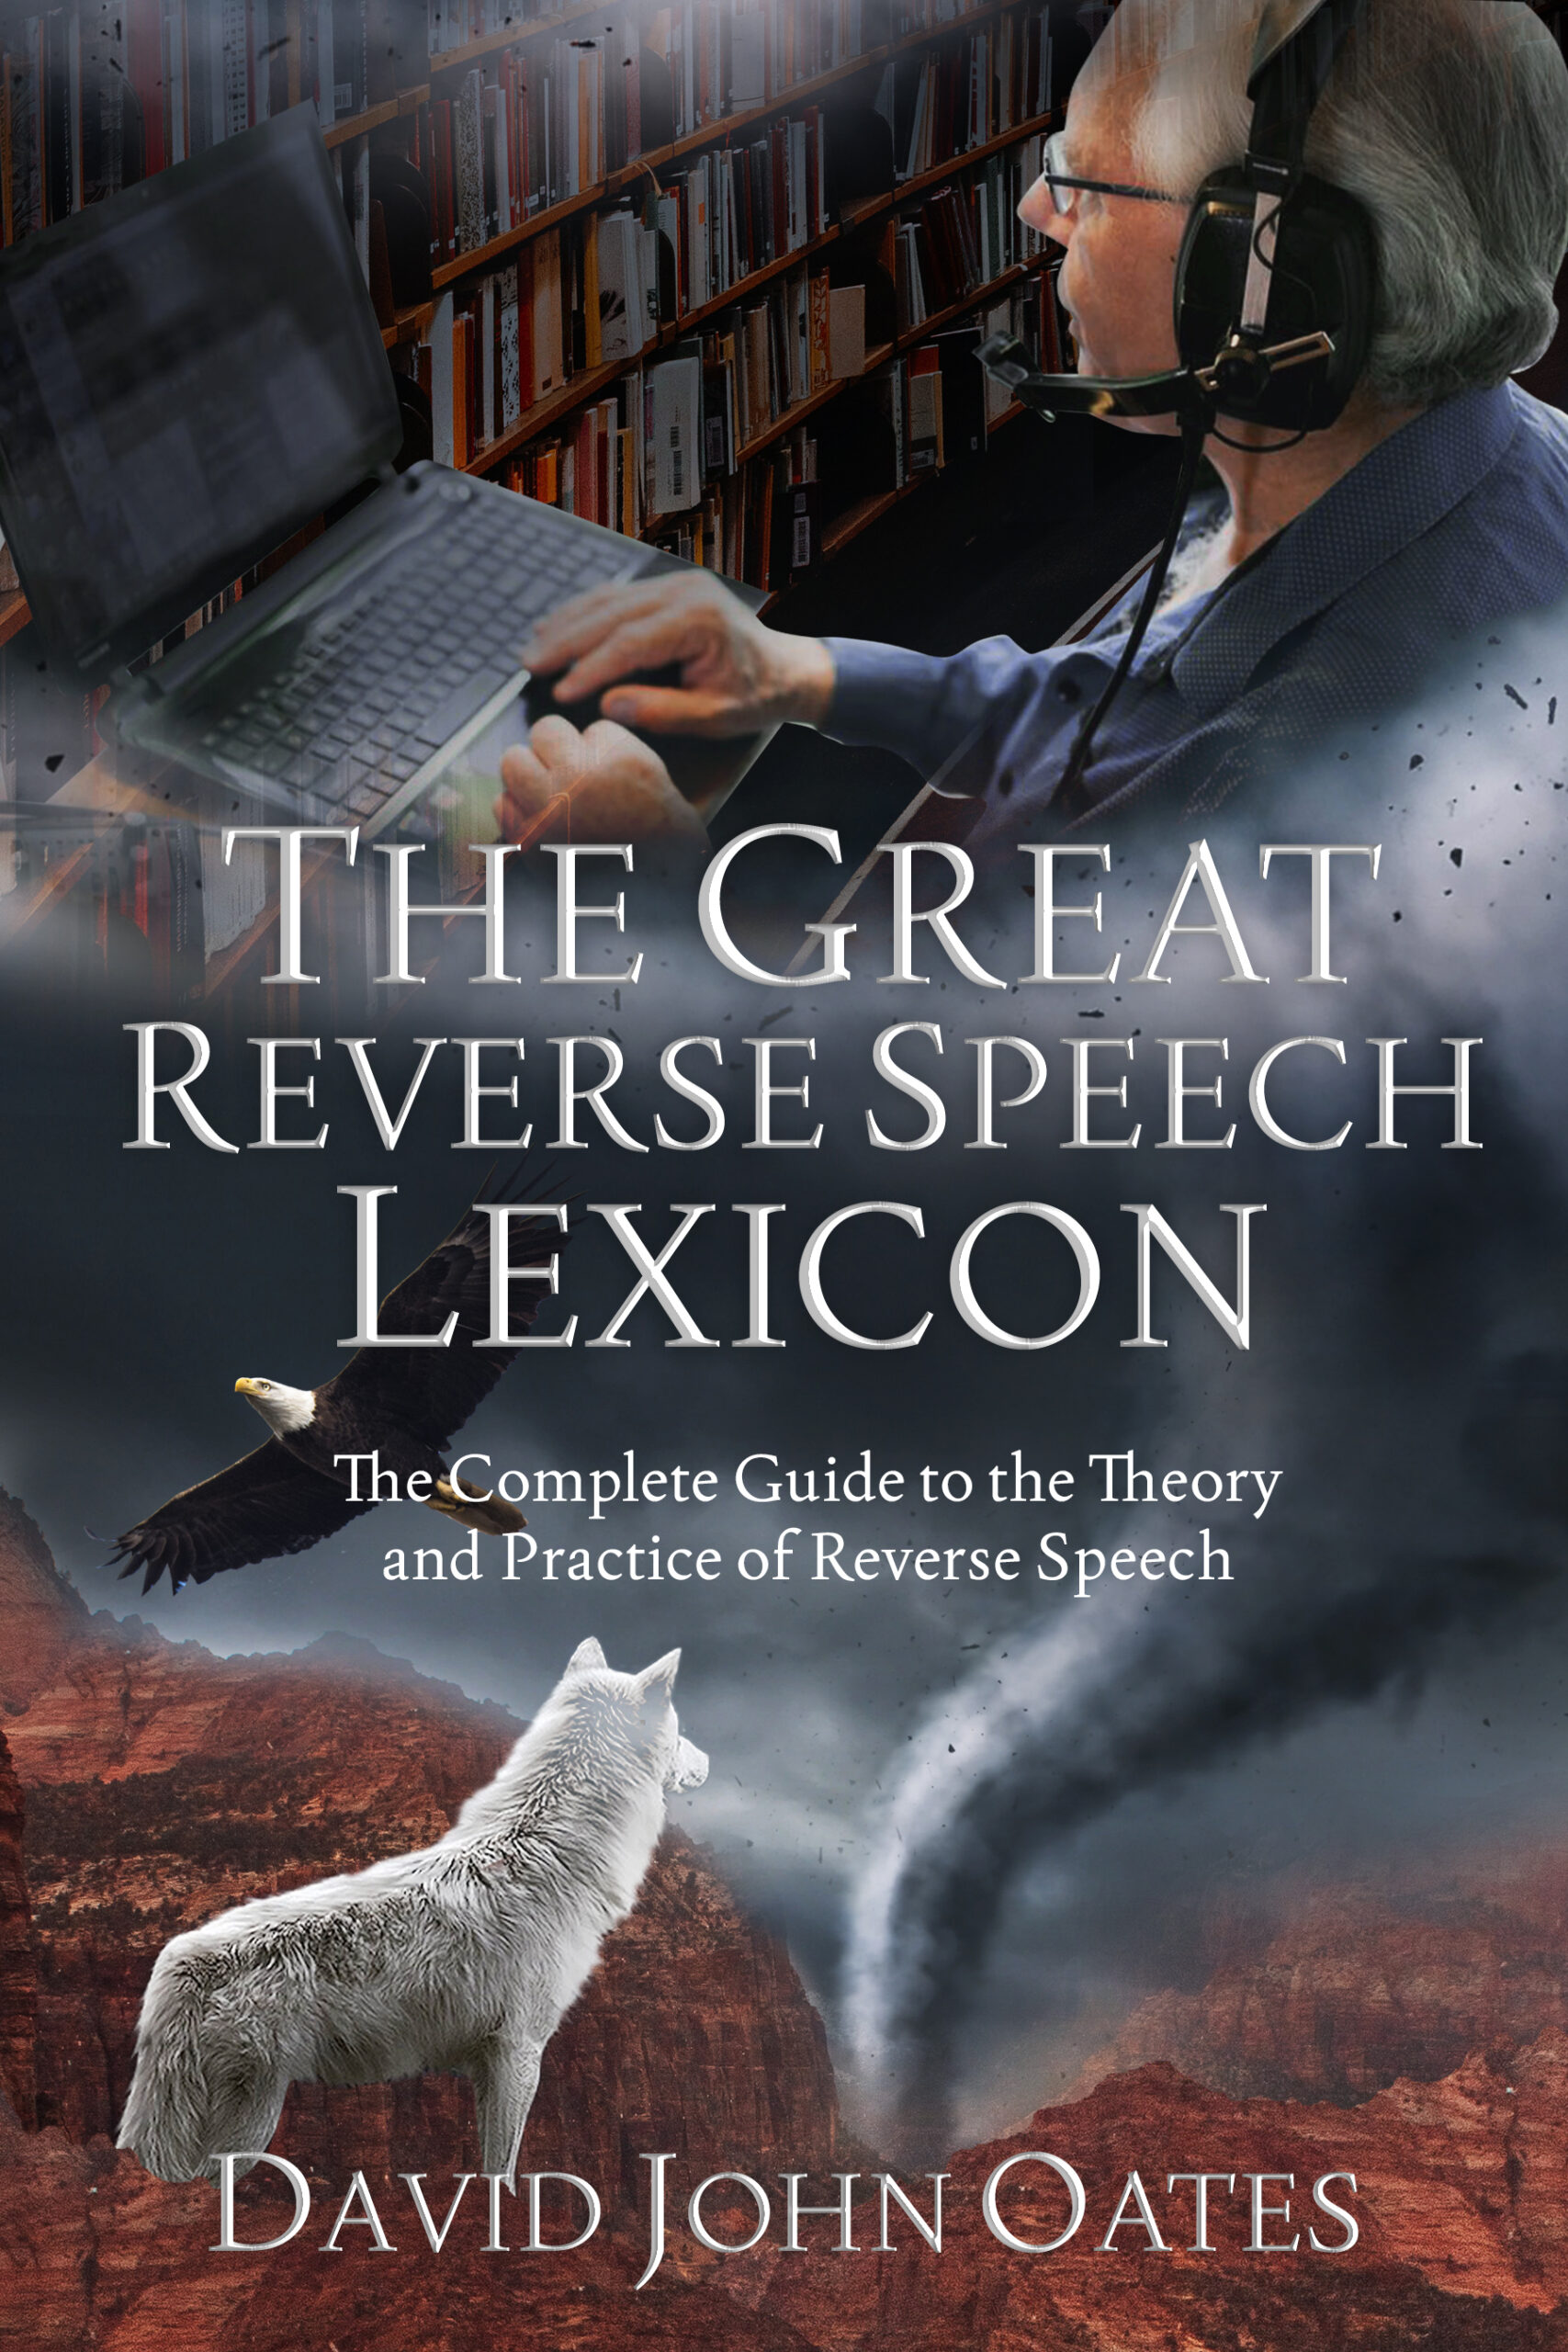 The Great Reverse Speech Lexicon - The Complete Guide to the Theory and Practice of Reverse Speech - By David John Oates